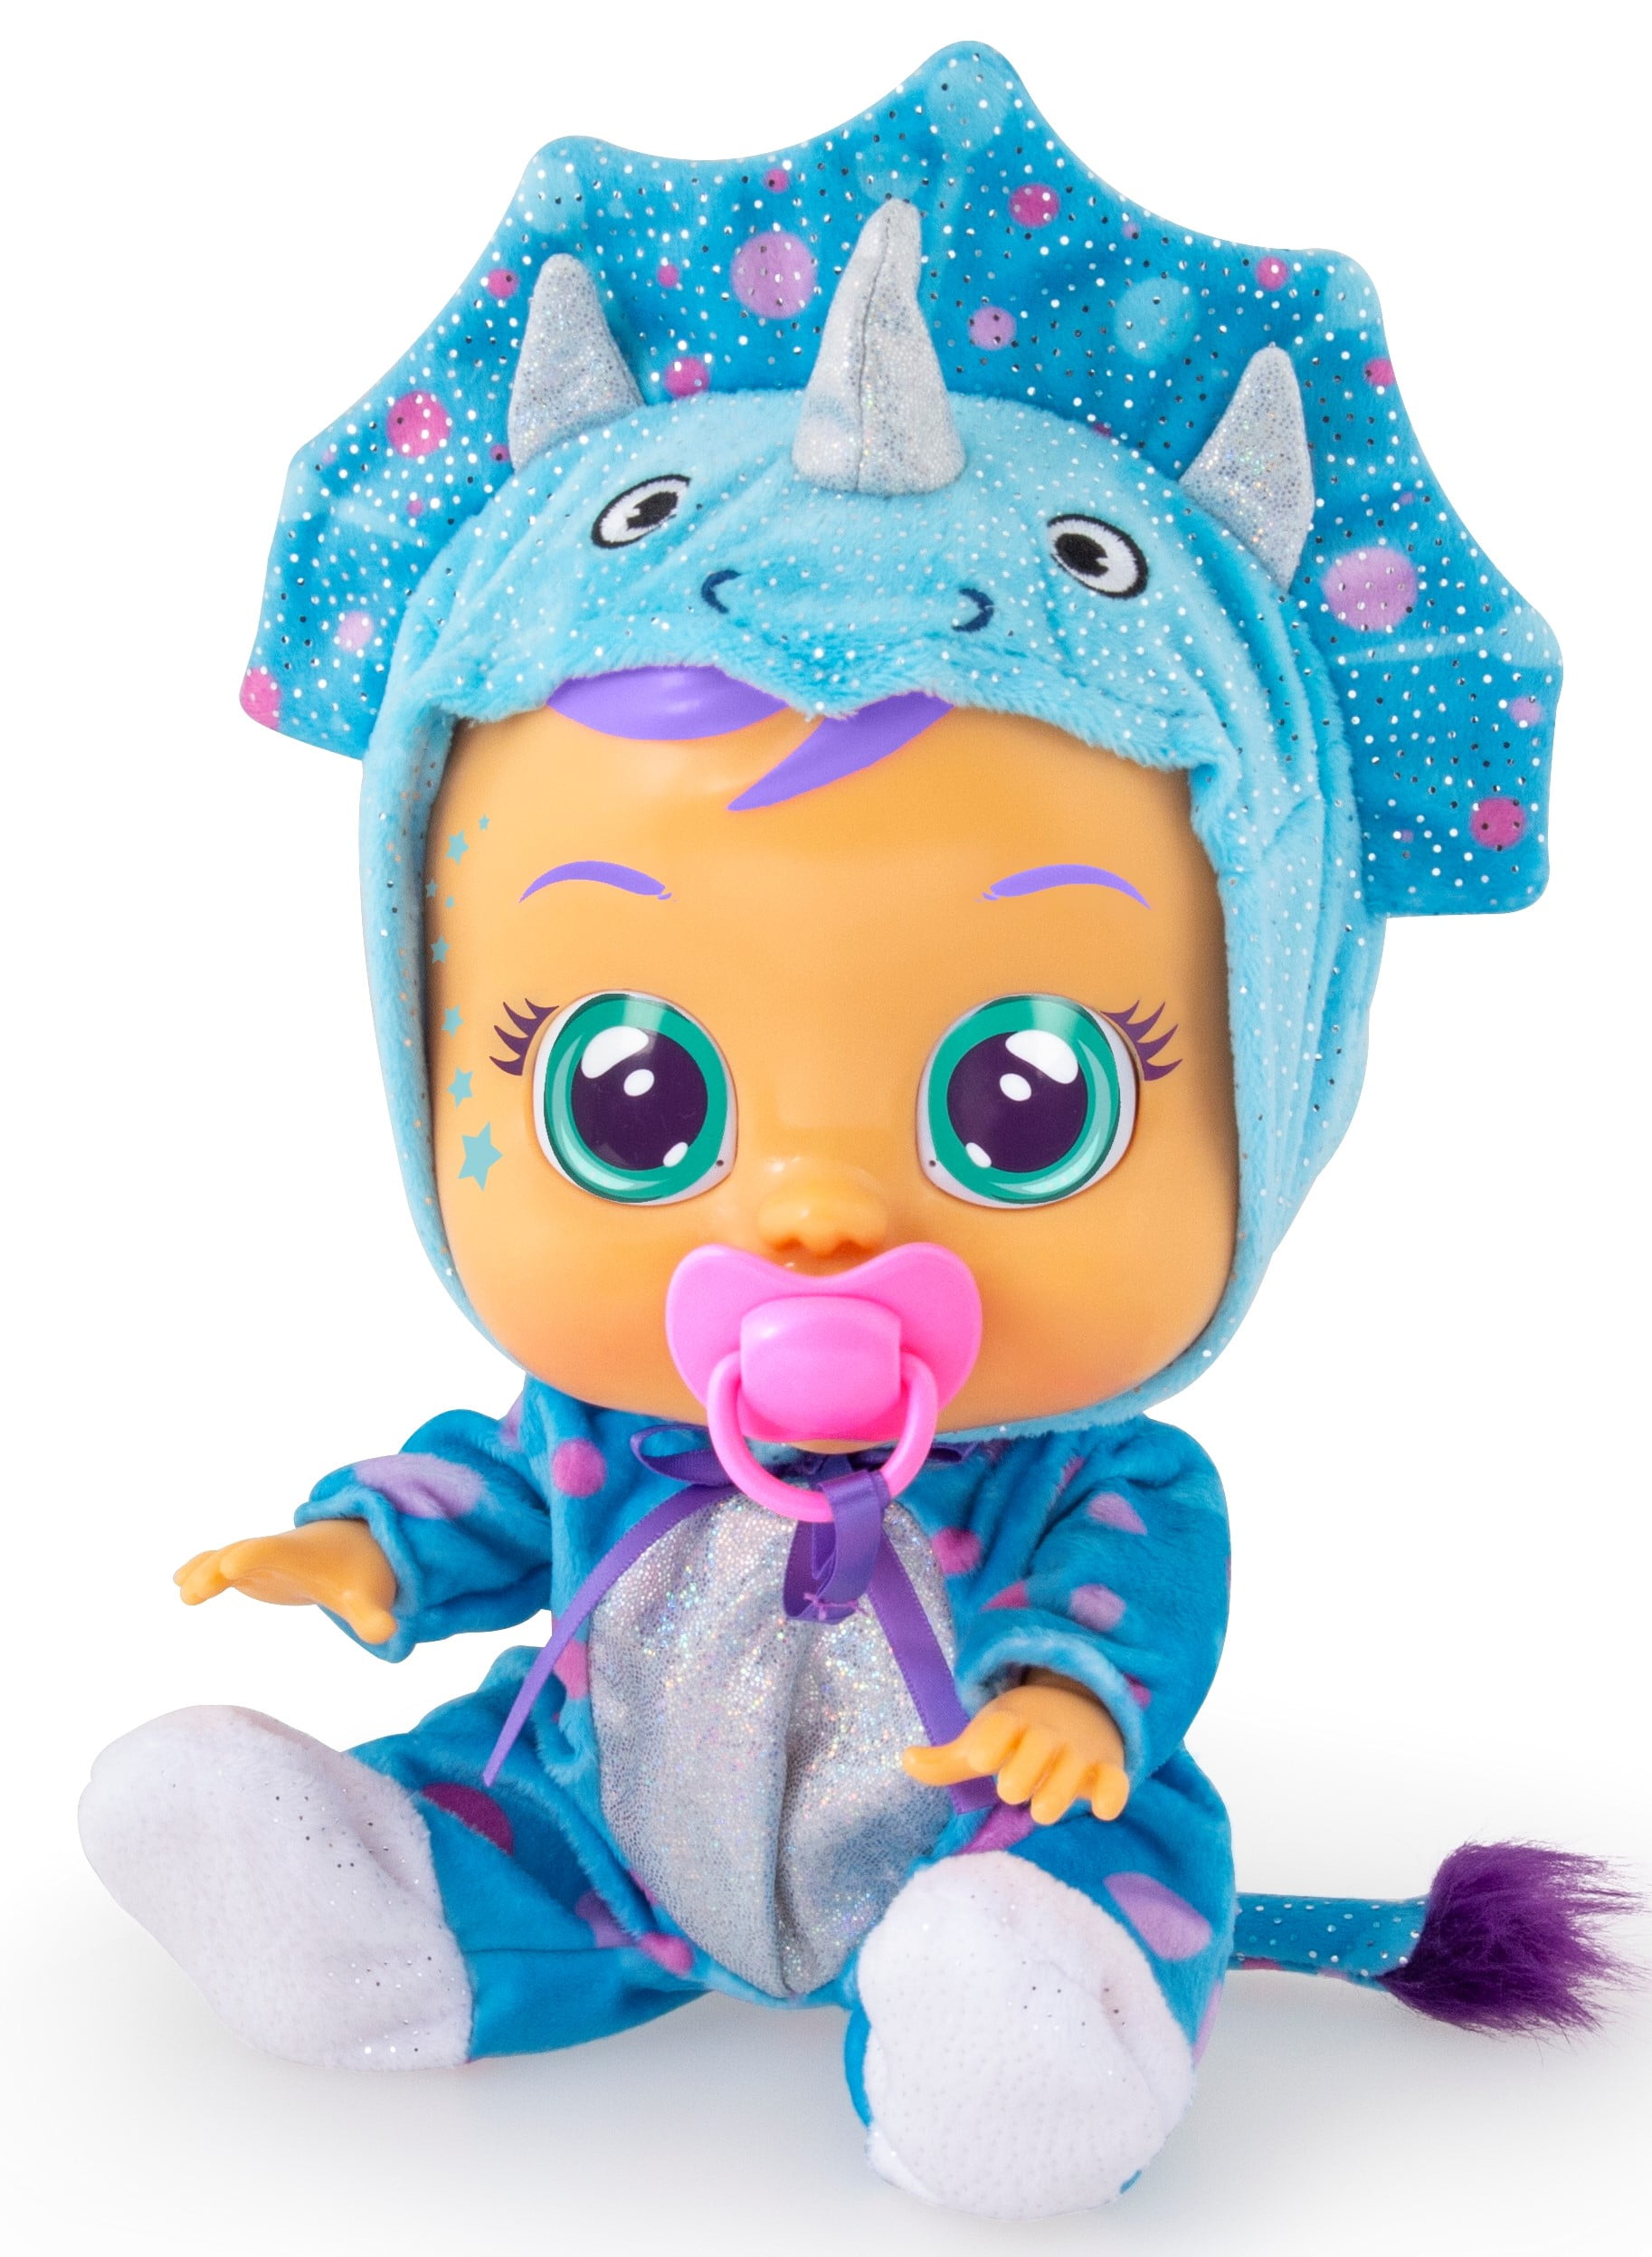 Cry Babies Tina Doll For Children Toy Give Baby Lovely toys 